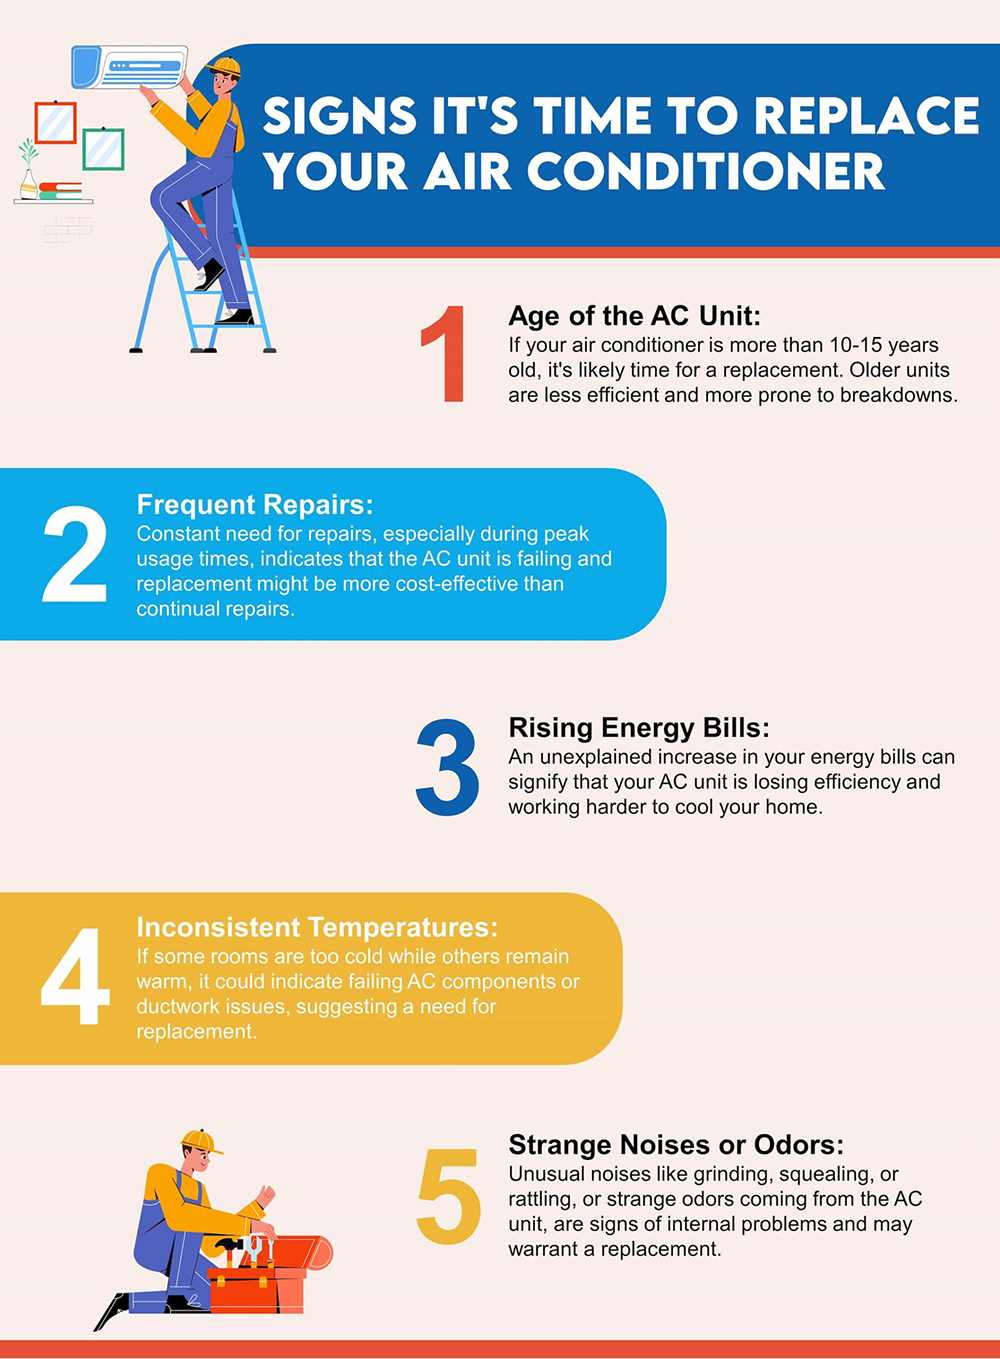 Signs Its Time to Replace Your Air Conditioner